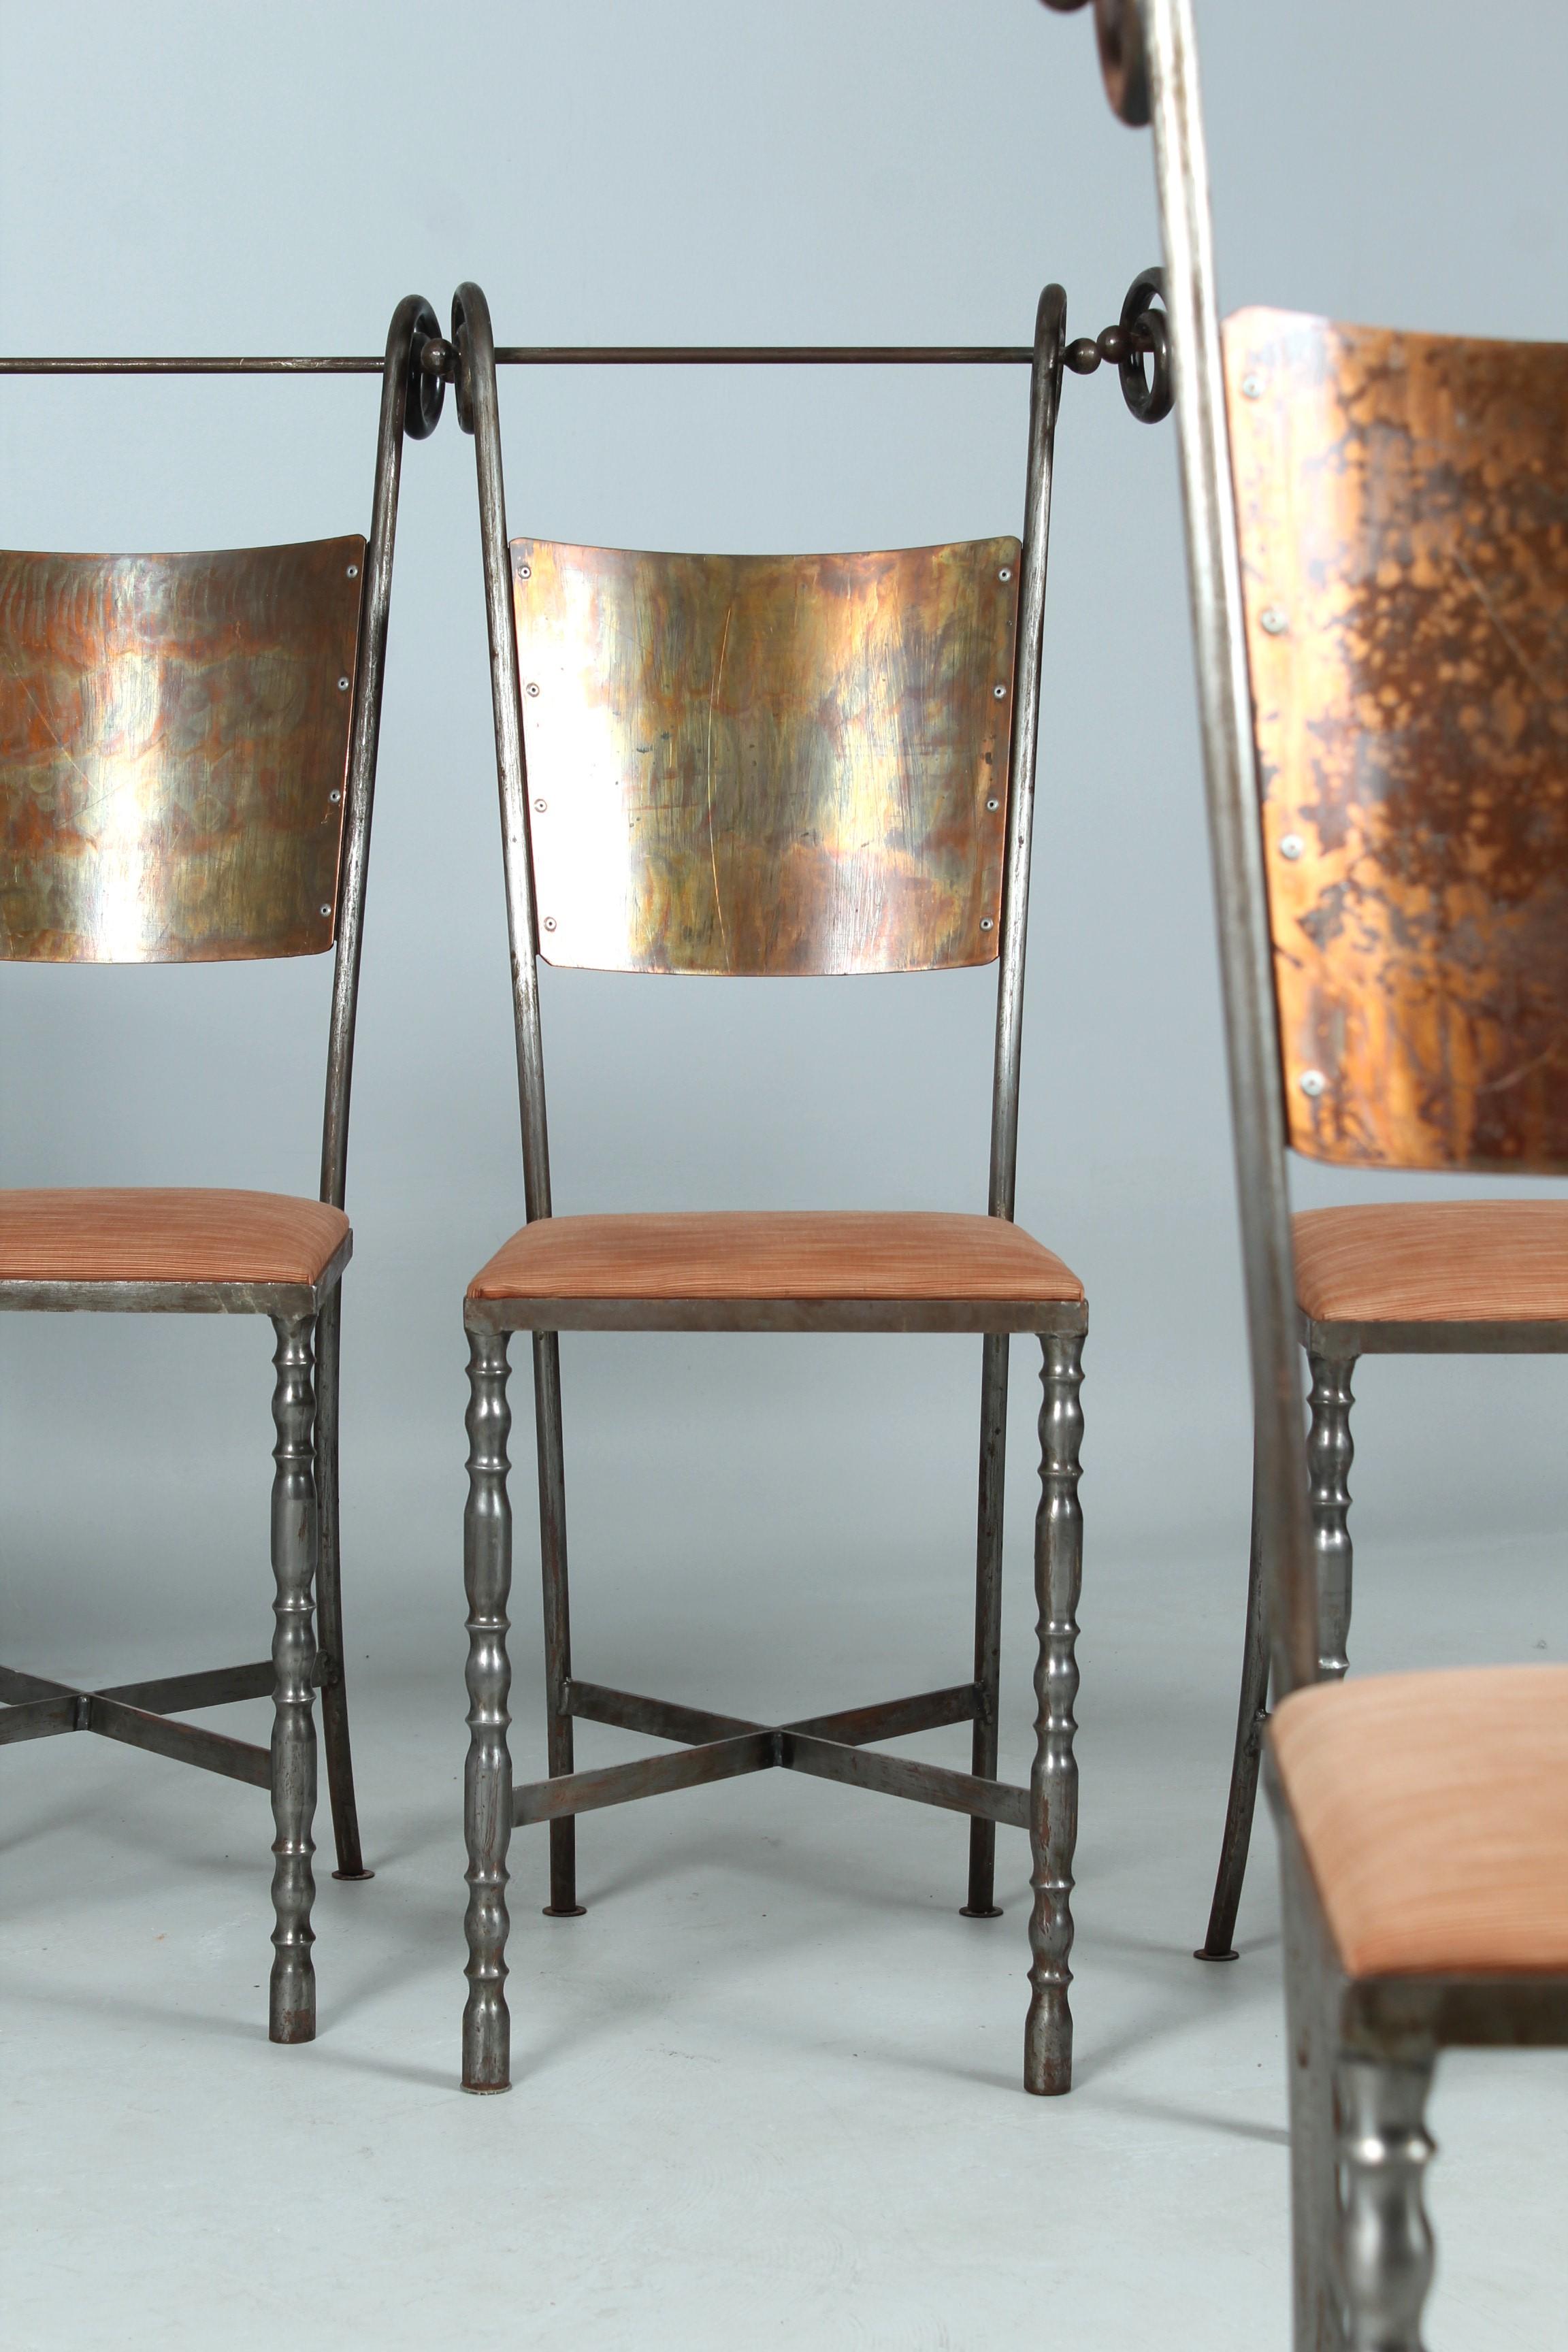 Set of 8 Wrought Iron Chairs, Dining Chairs, 1980s? For Sale 3